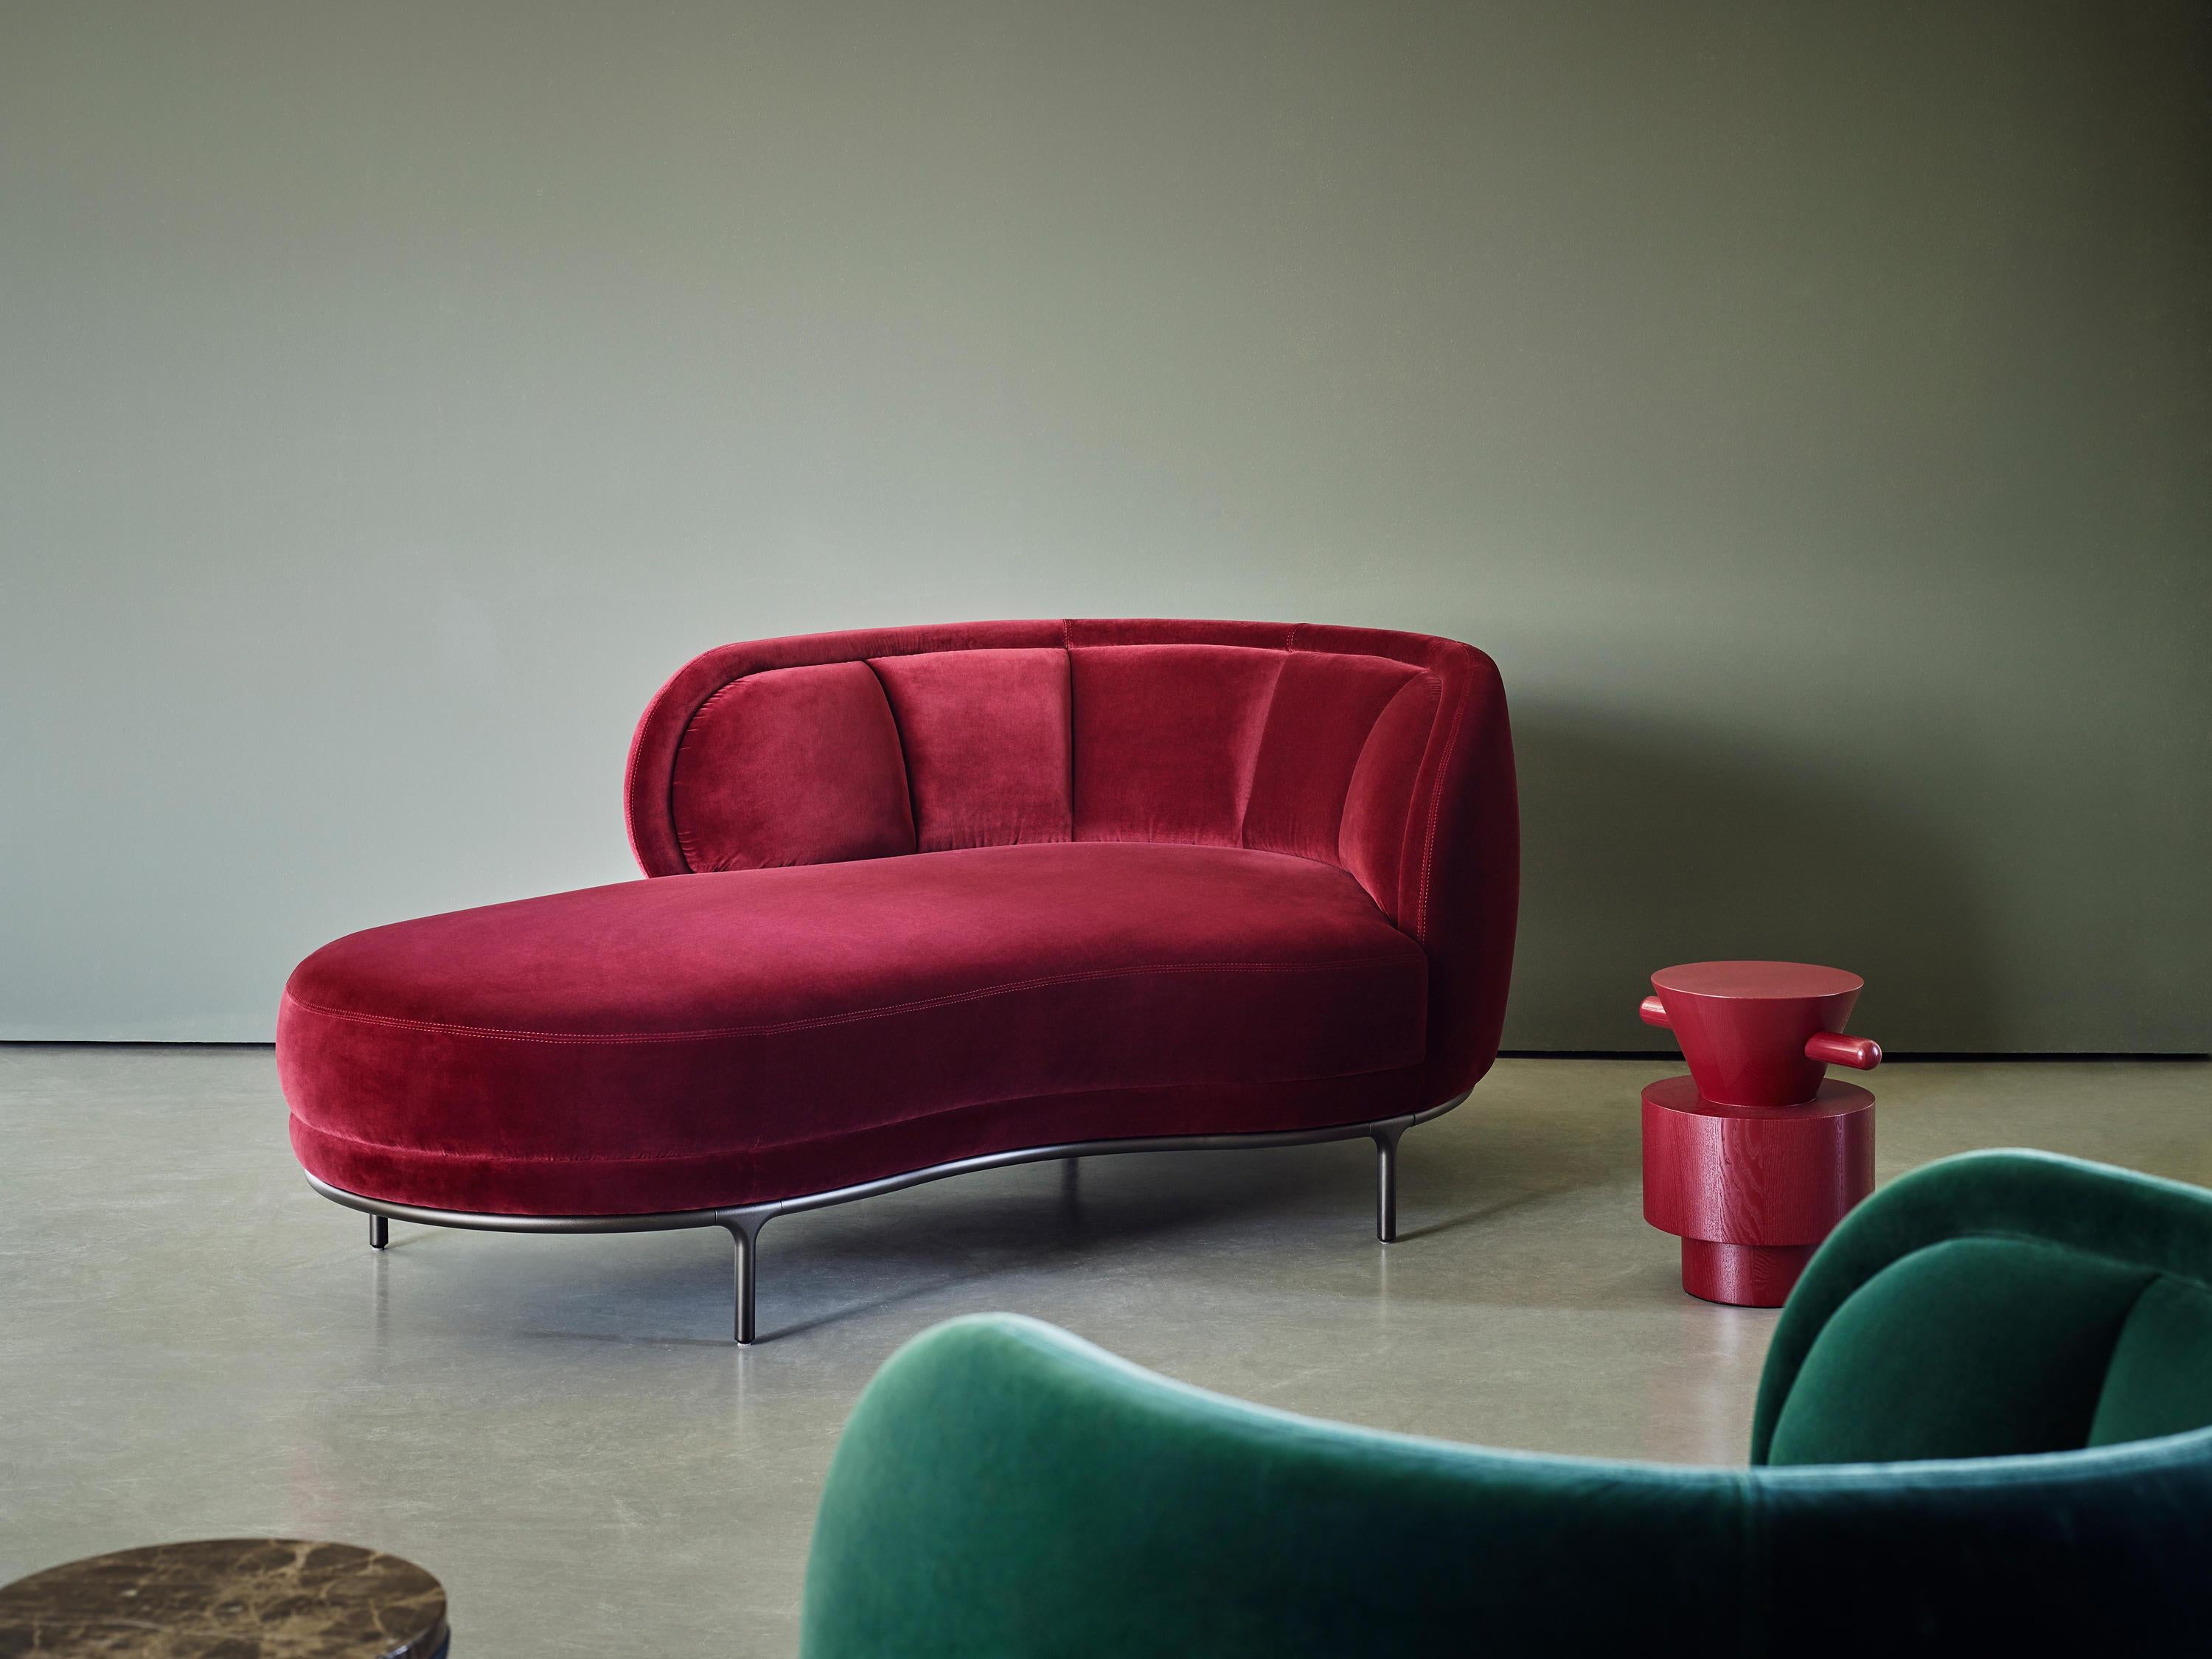 My private island: a classic free-standing chaise lounge is always something of a private retreat, even when it is part of a larger ensemble. Vuelta’s sensual lines have found a logical progression in this chaise longue (W 190cm).
The distinctive